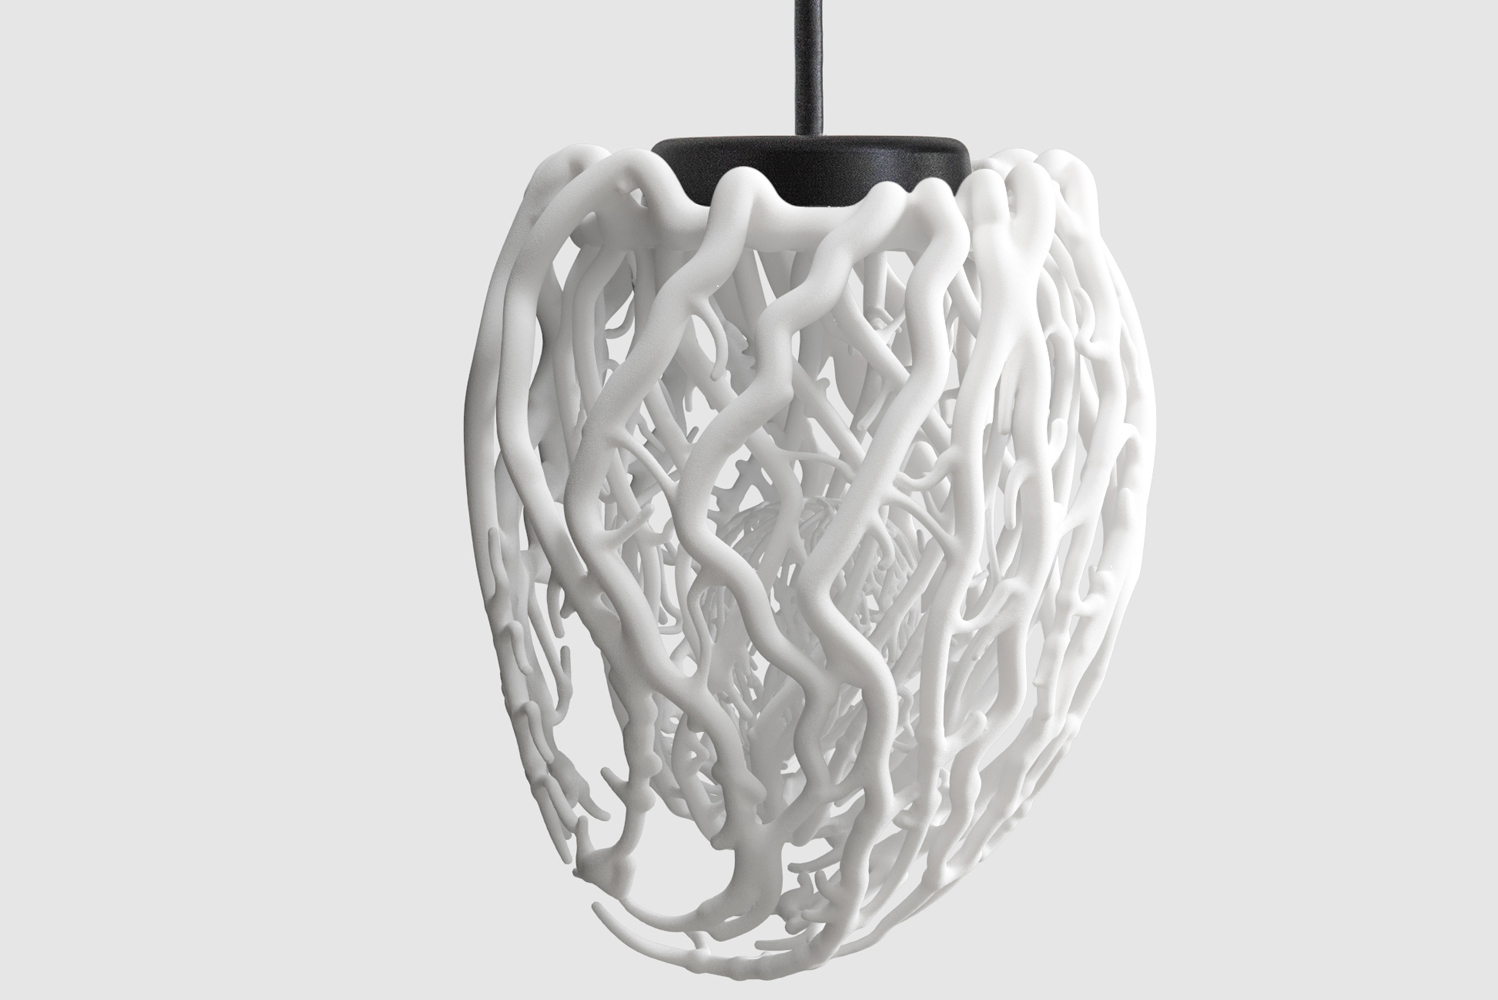 Guto Requena looked to the cycle of life as inspiration for the Life lamp